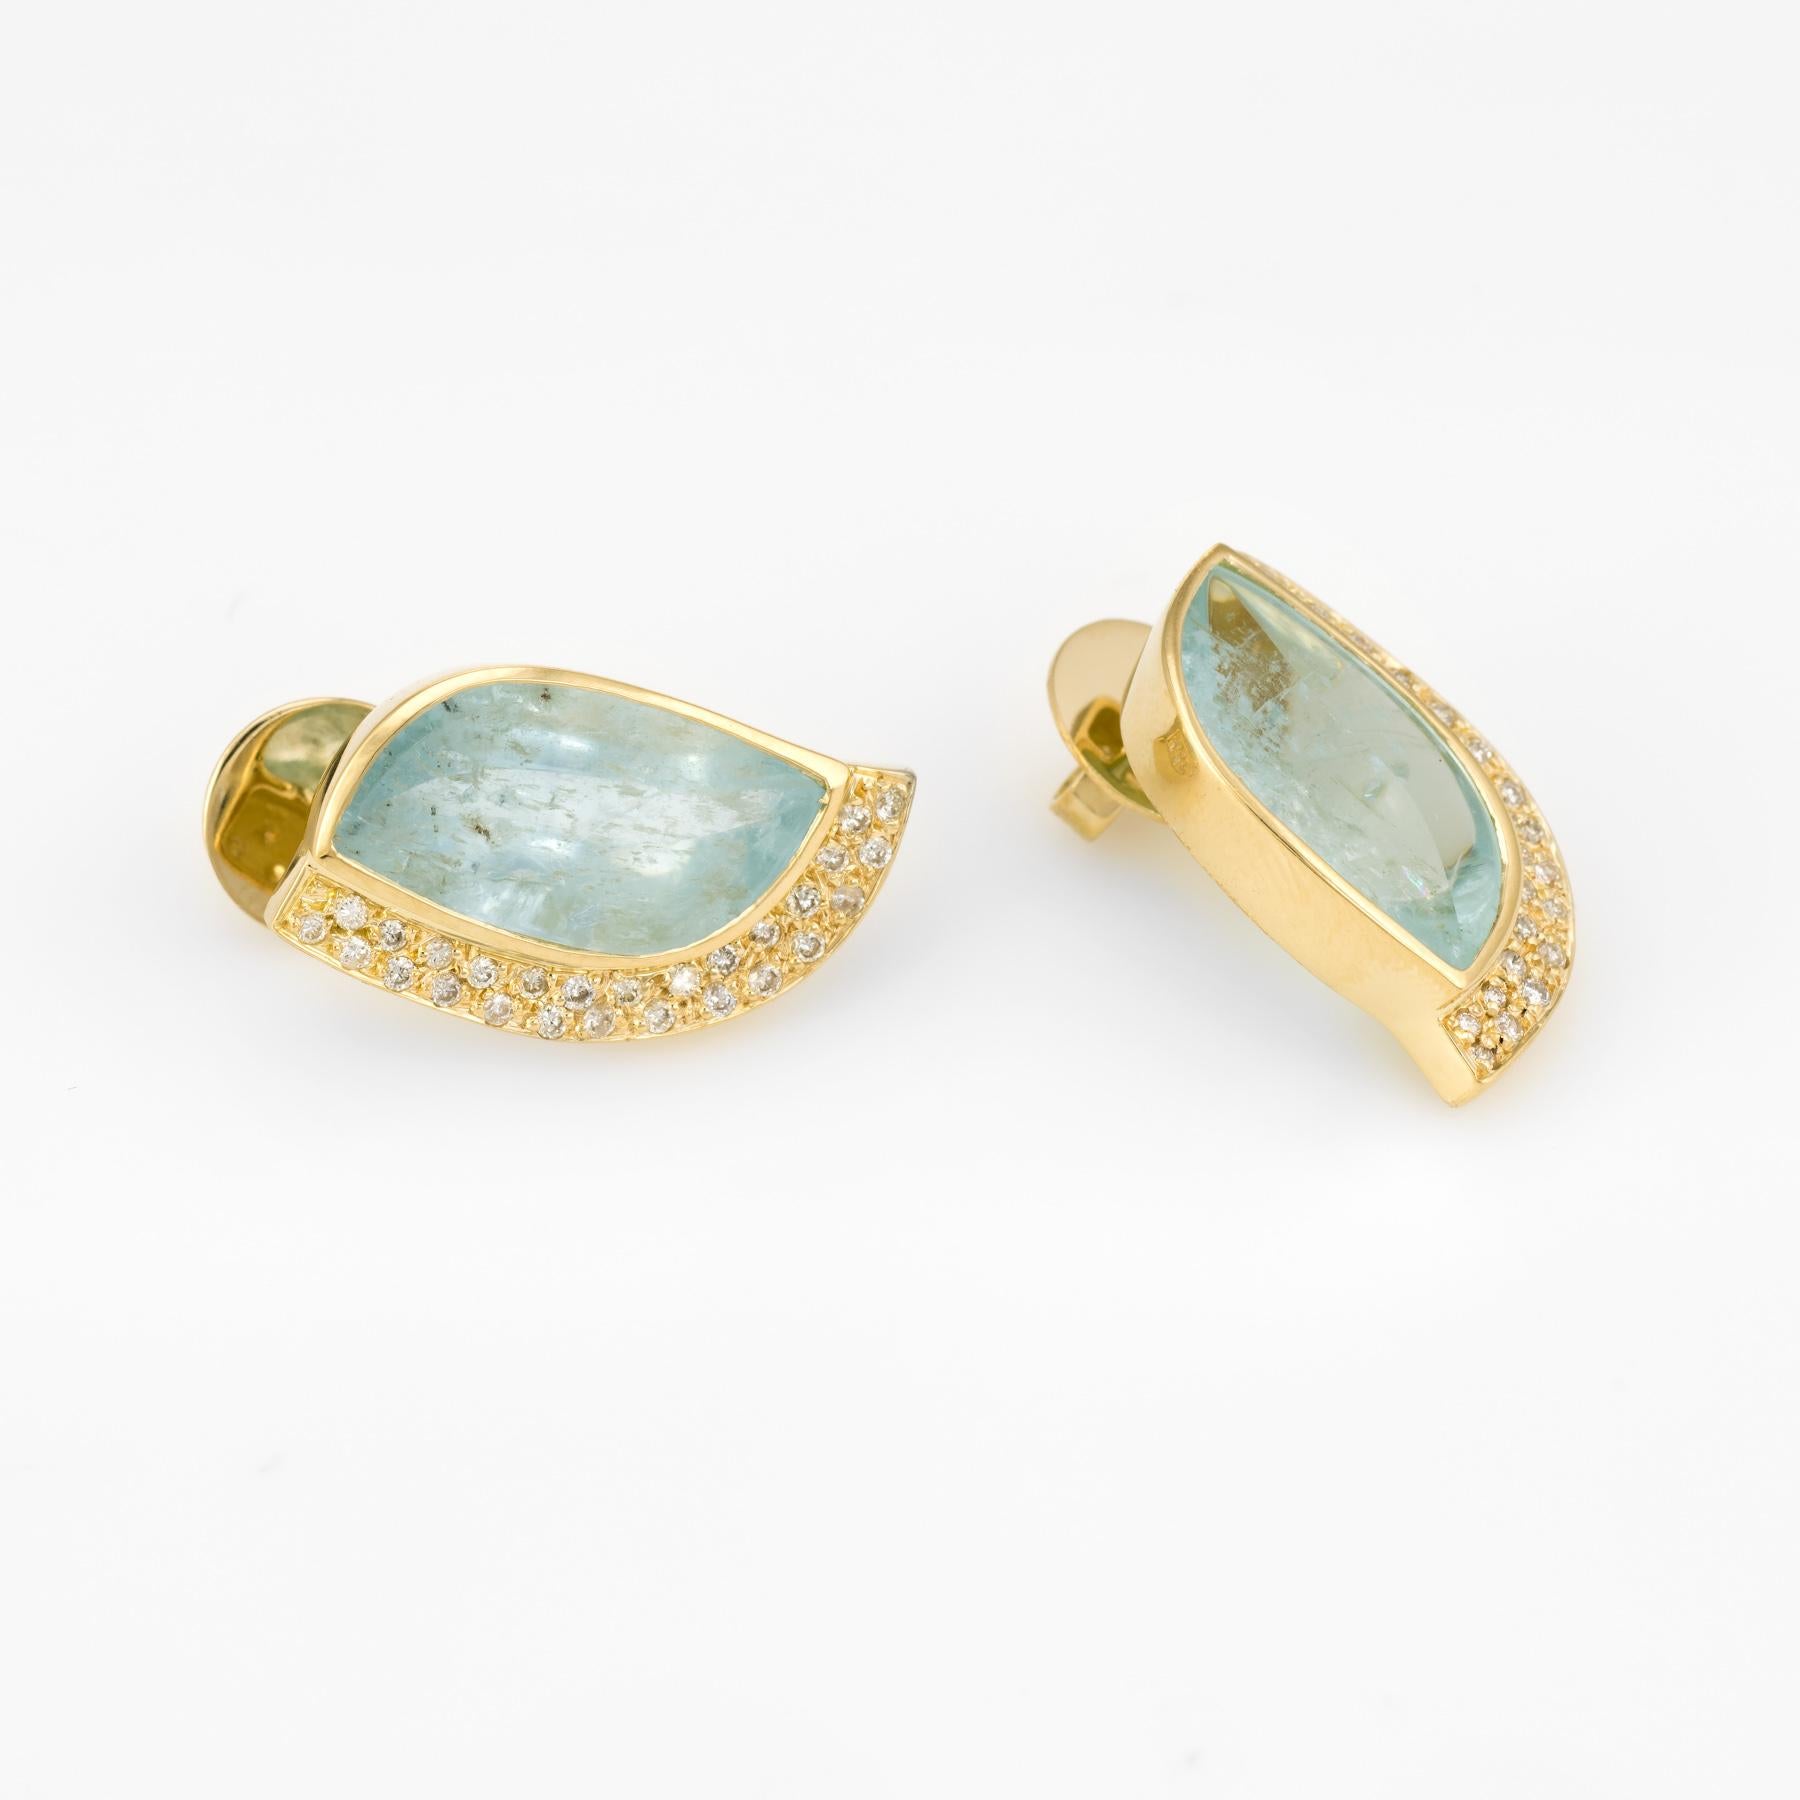 Stylish pair of vintage aquamarine & diamond earrings (circa 1980s), crafted in 18k yellow gold. 

Two pieces of aquamarine measure 18mm x 10mm. The aquamarine features a low dome smooth cabochon cut with a center pointed ridge cut curved to the